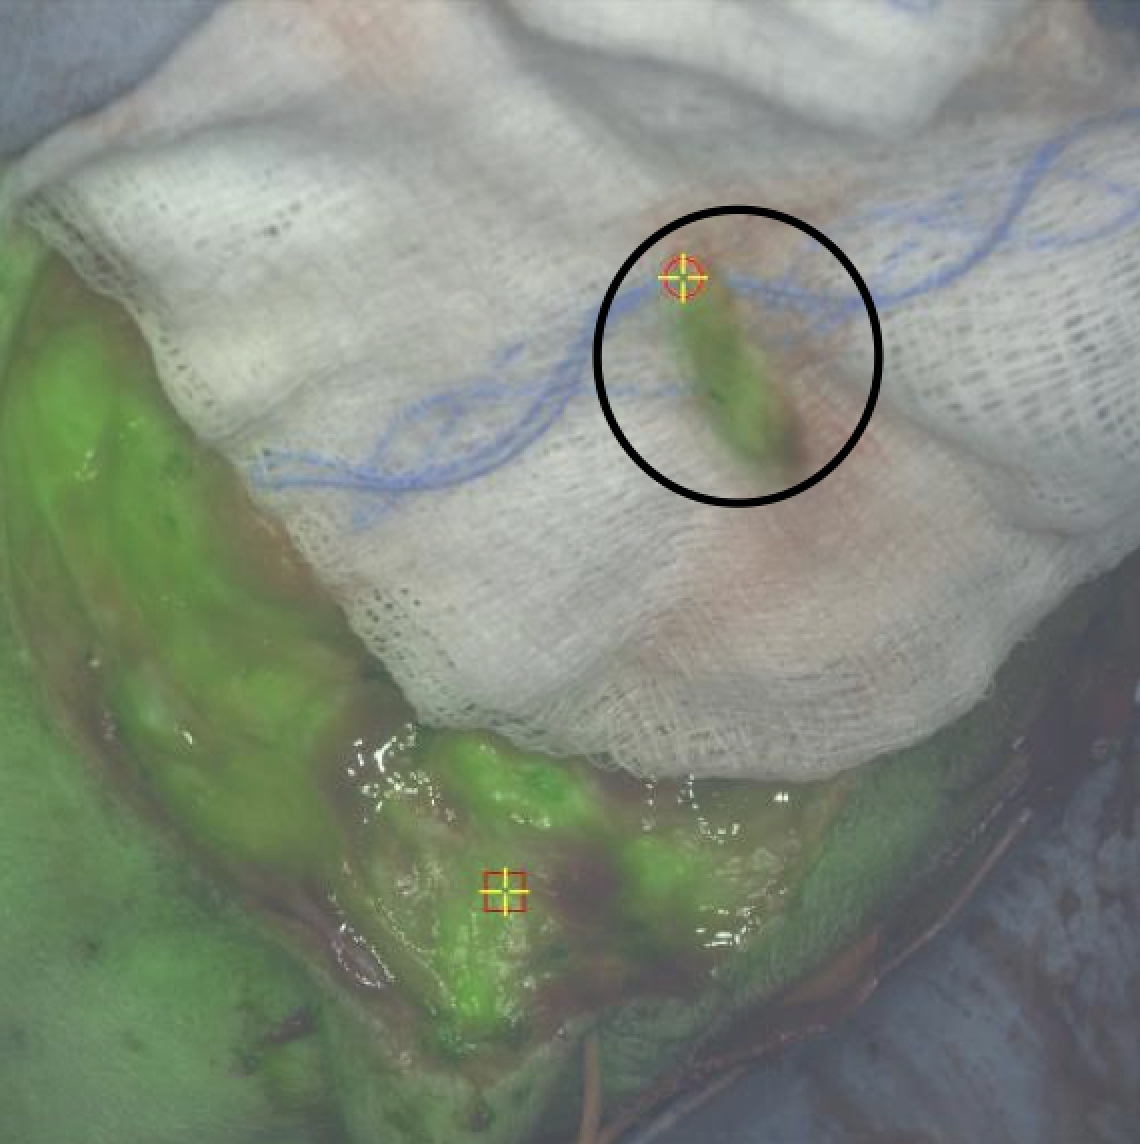 Cancer tissue labeled with dye glowing green to indicate where disease is located